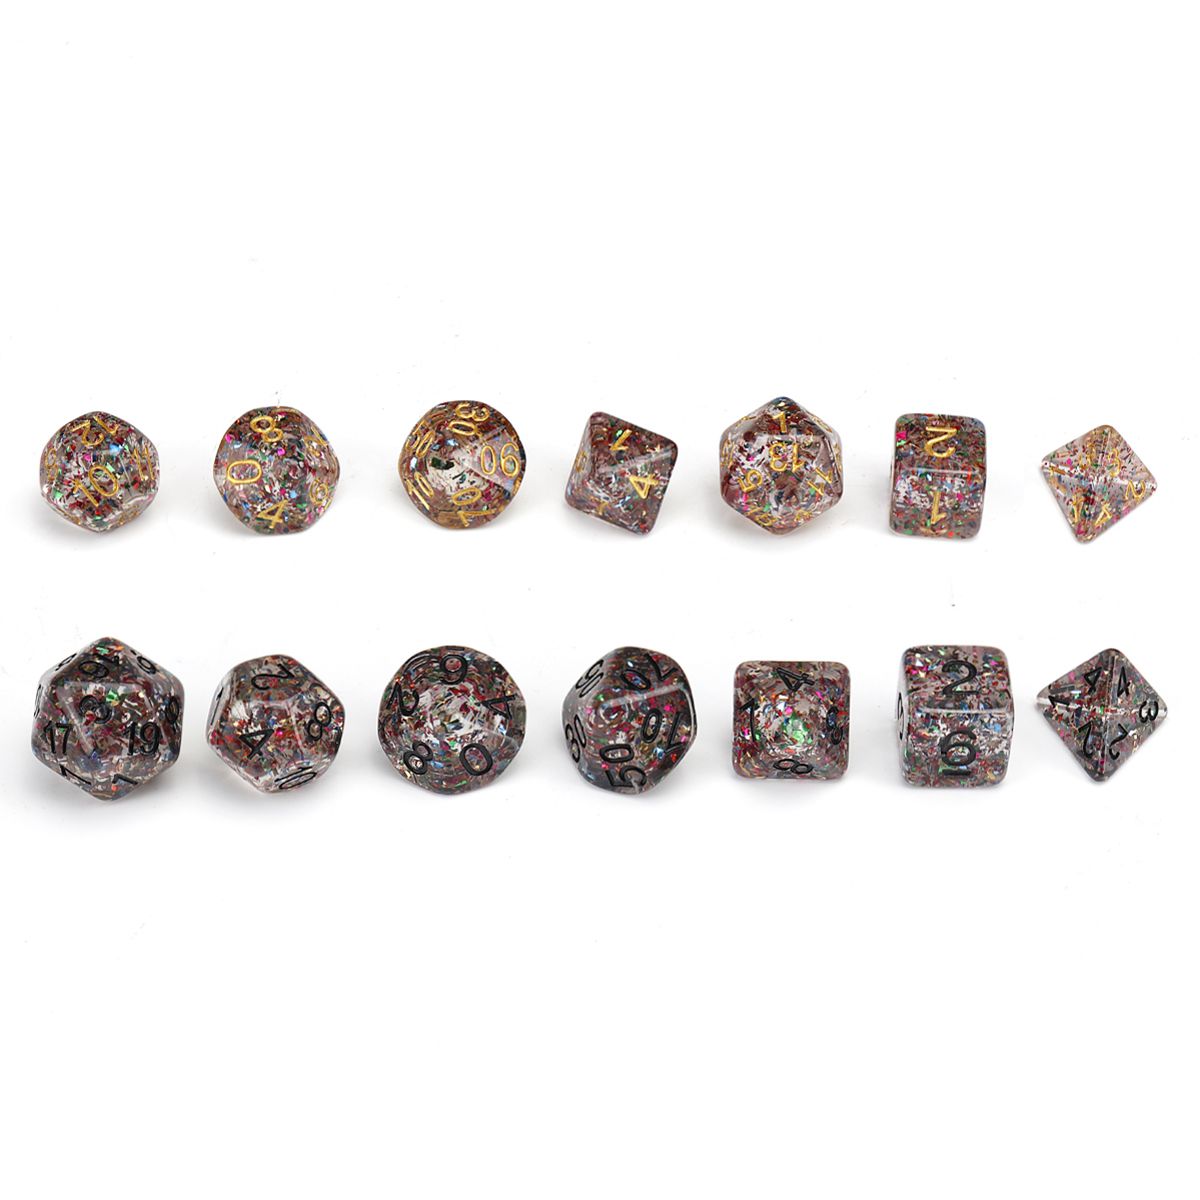 7pcs-Polyhedral-Dice-for-Dungeons-and-Dragons-Party-Game-Toy-With-Bag-1665729